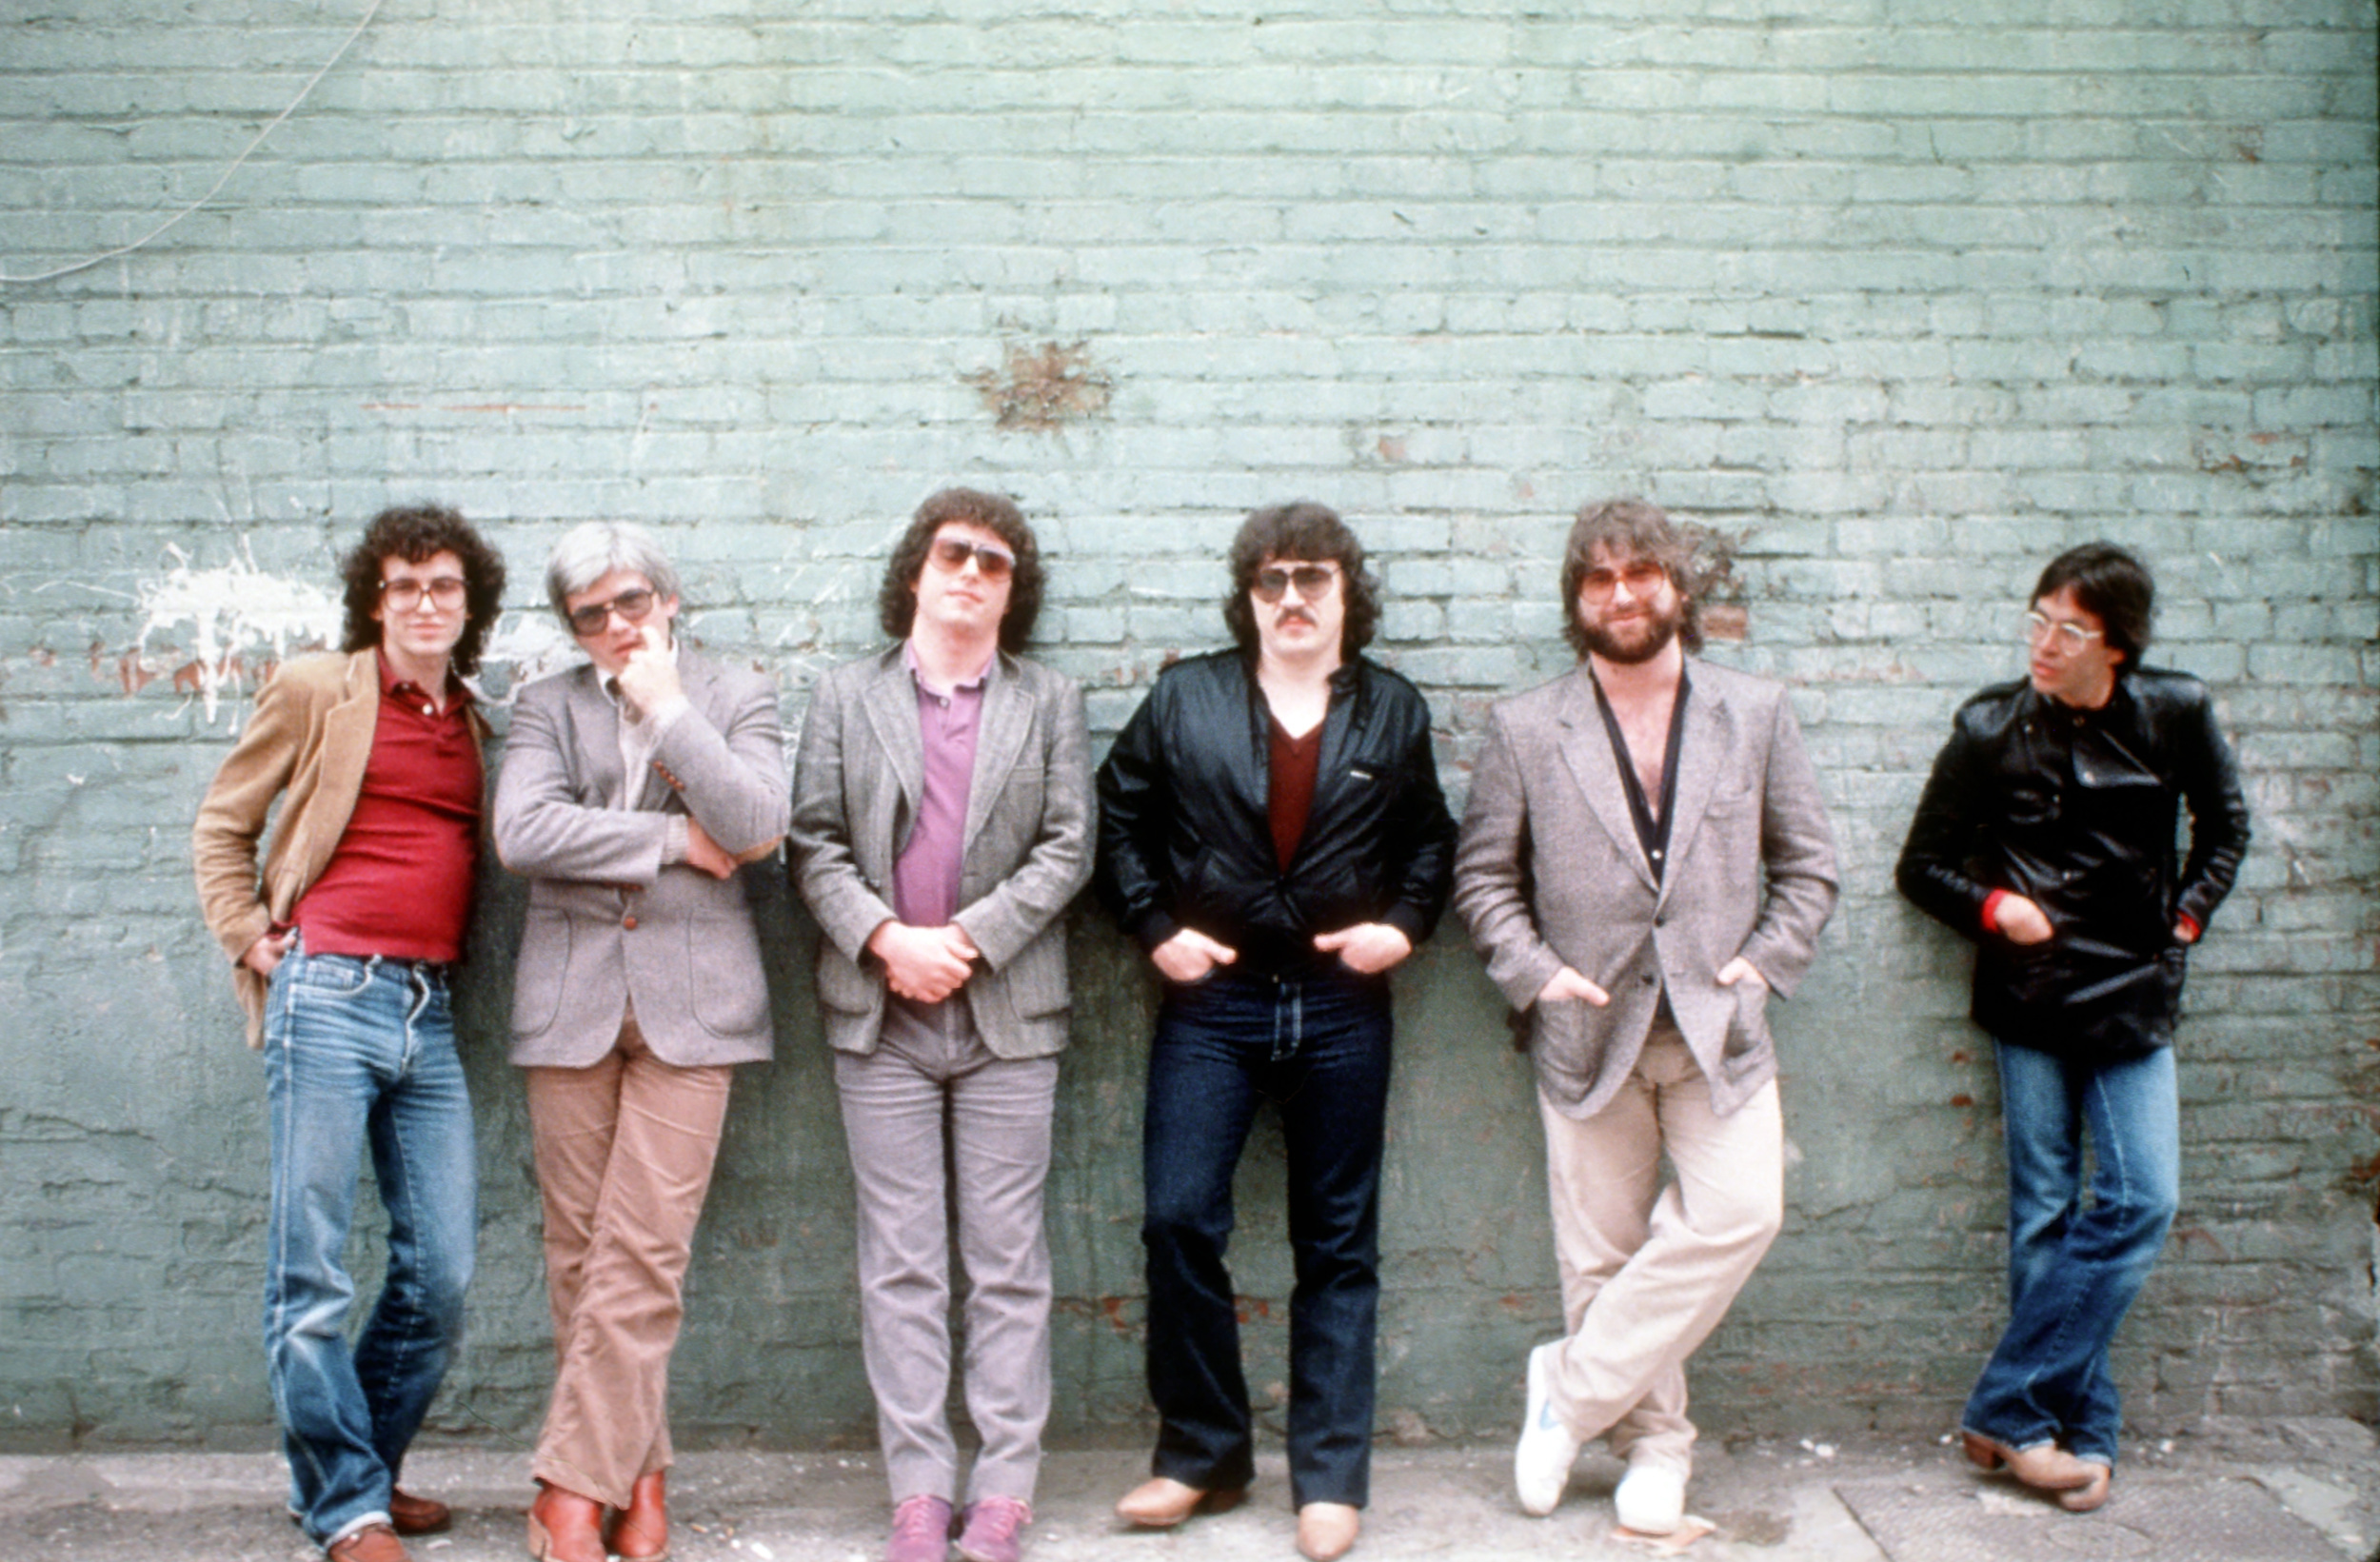 <p>Toto rightfully has a place in the yacht rock world, but the band also broke into the top-40, FM radio, and MTV mainstream with the release of 1982's <em>Toto IV</em>. <a href="https://www.youtube.com/watch?v=qmOLtTGvsbM">"Rosanna"</a> was a big reason for the album's success, peaking at No. 2 on <em>Billboard</em>'s Hot 100 and winning the Record of the Year Grammy Award. Sure, it's not typical yacht rock fare, per se. It's certainly heavier than other popular tracks on this list, but it's certainly a product of AOR and still routinely played in dentist offices throughout America. </p><p>You may also like: <a href='https://www.yardbarker.com/entertainment/articles/the_25_best_car_chases_in_movie_history_031624/s1__36324920'>The 25 best car chases in movie history</a></p>